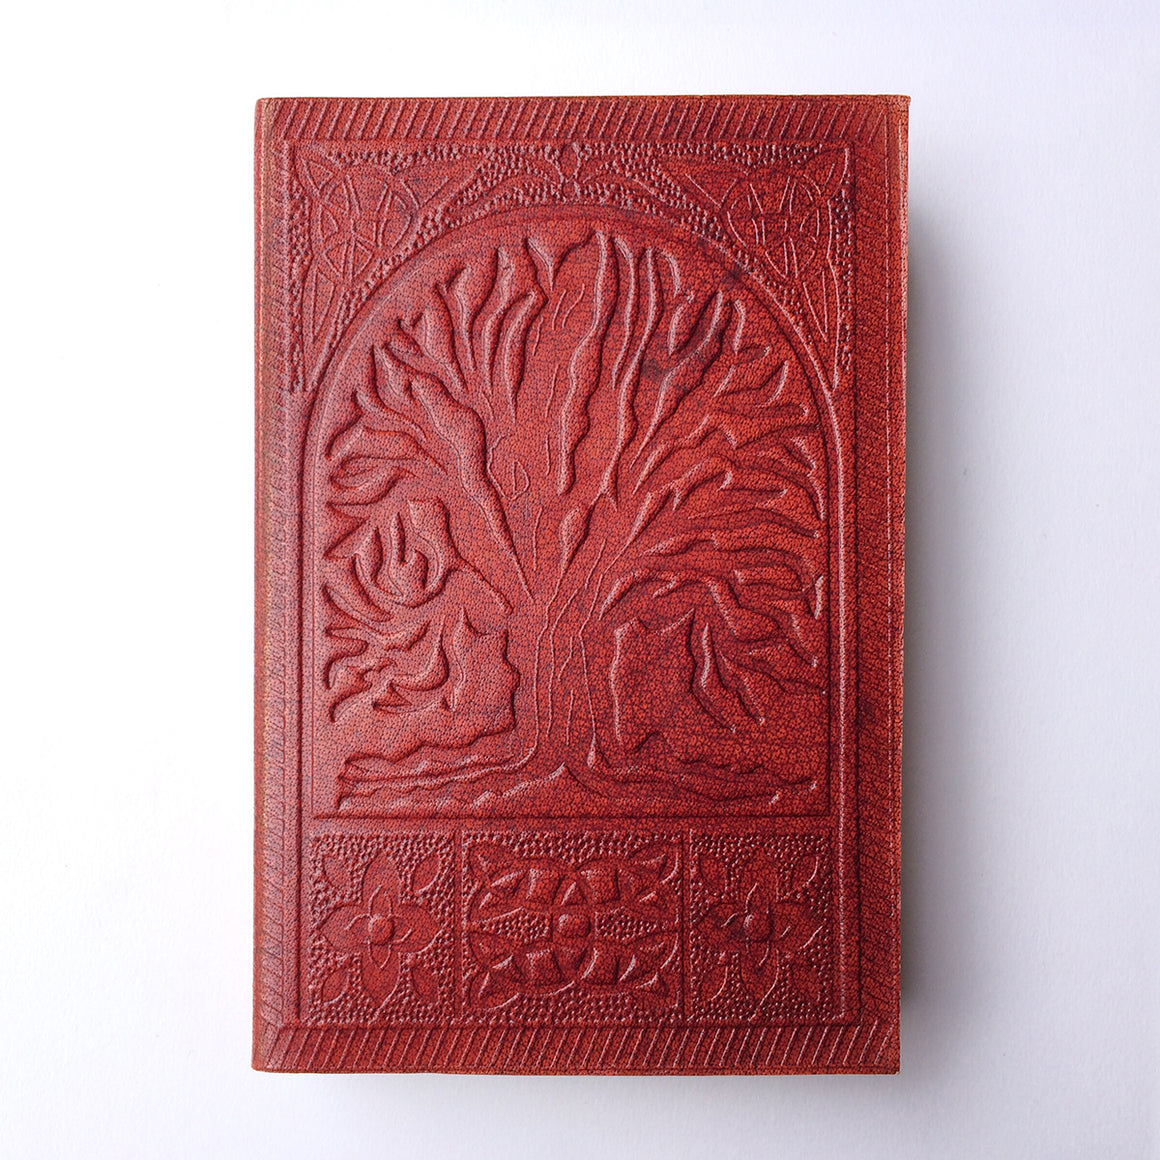 Fair Trade Leather Notebook with embossed Mandala design / Handmade Indian Leather Diary / Sketchbook / Journal - Front Cover